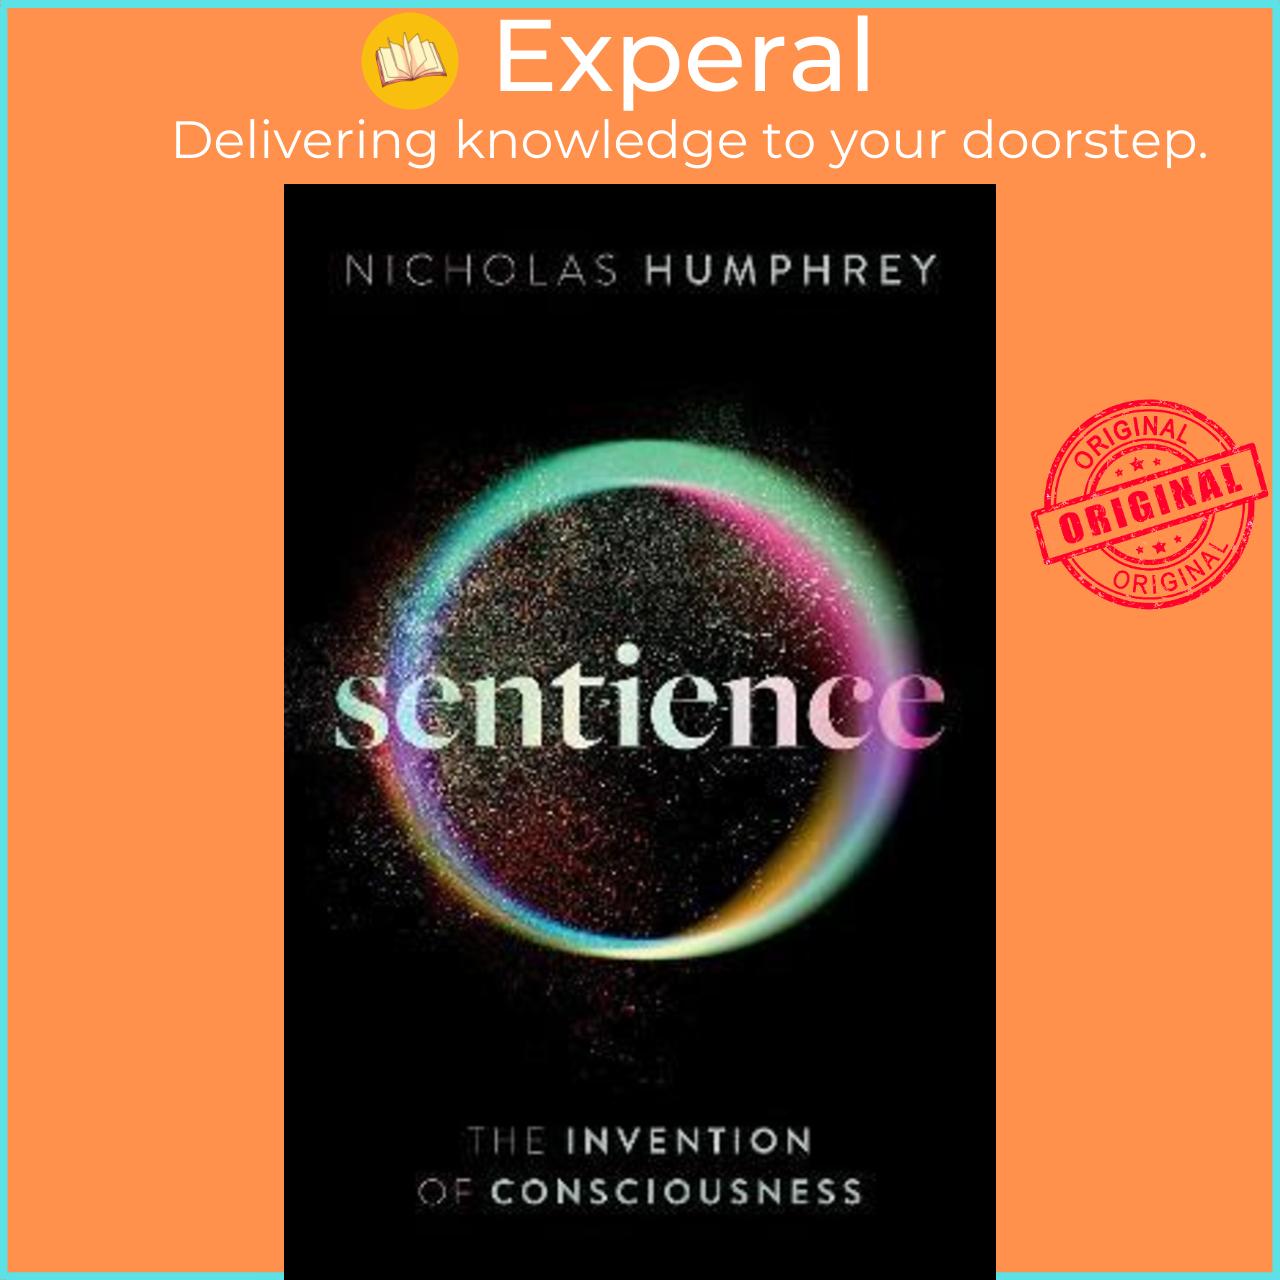 Sách - Sentience : The Invention of Consciousness by Nicholas Humphrey (UK edition, hardcover)